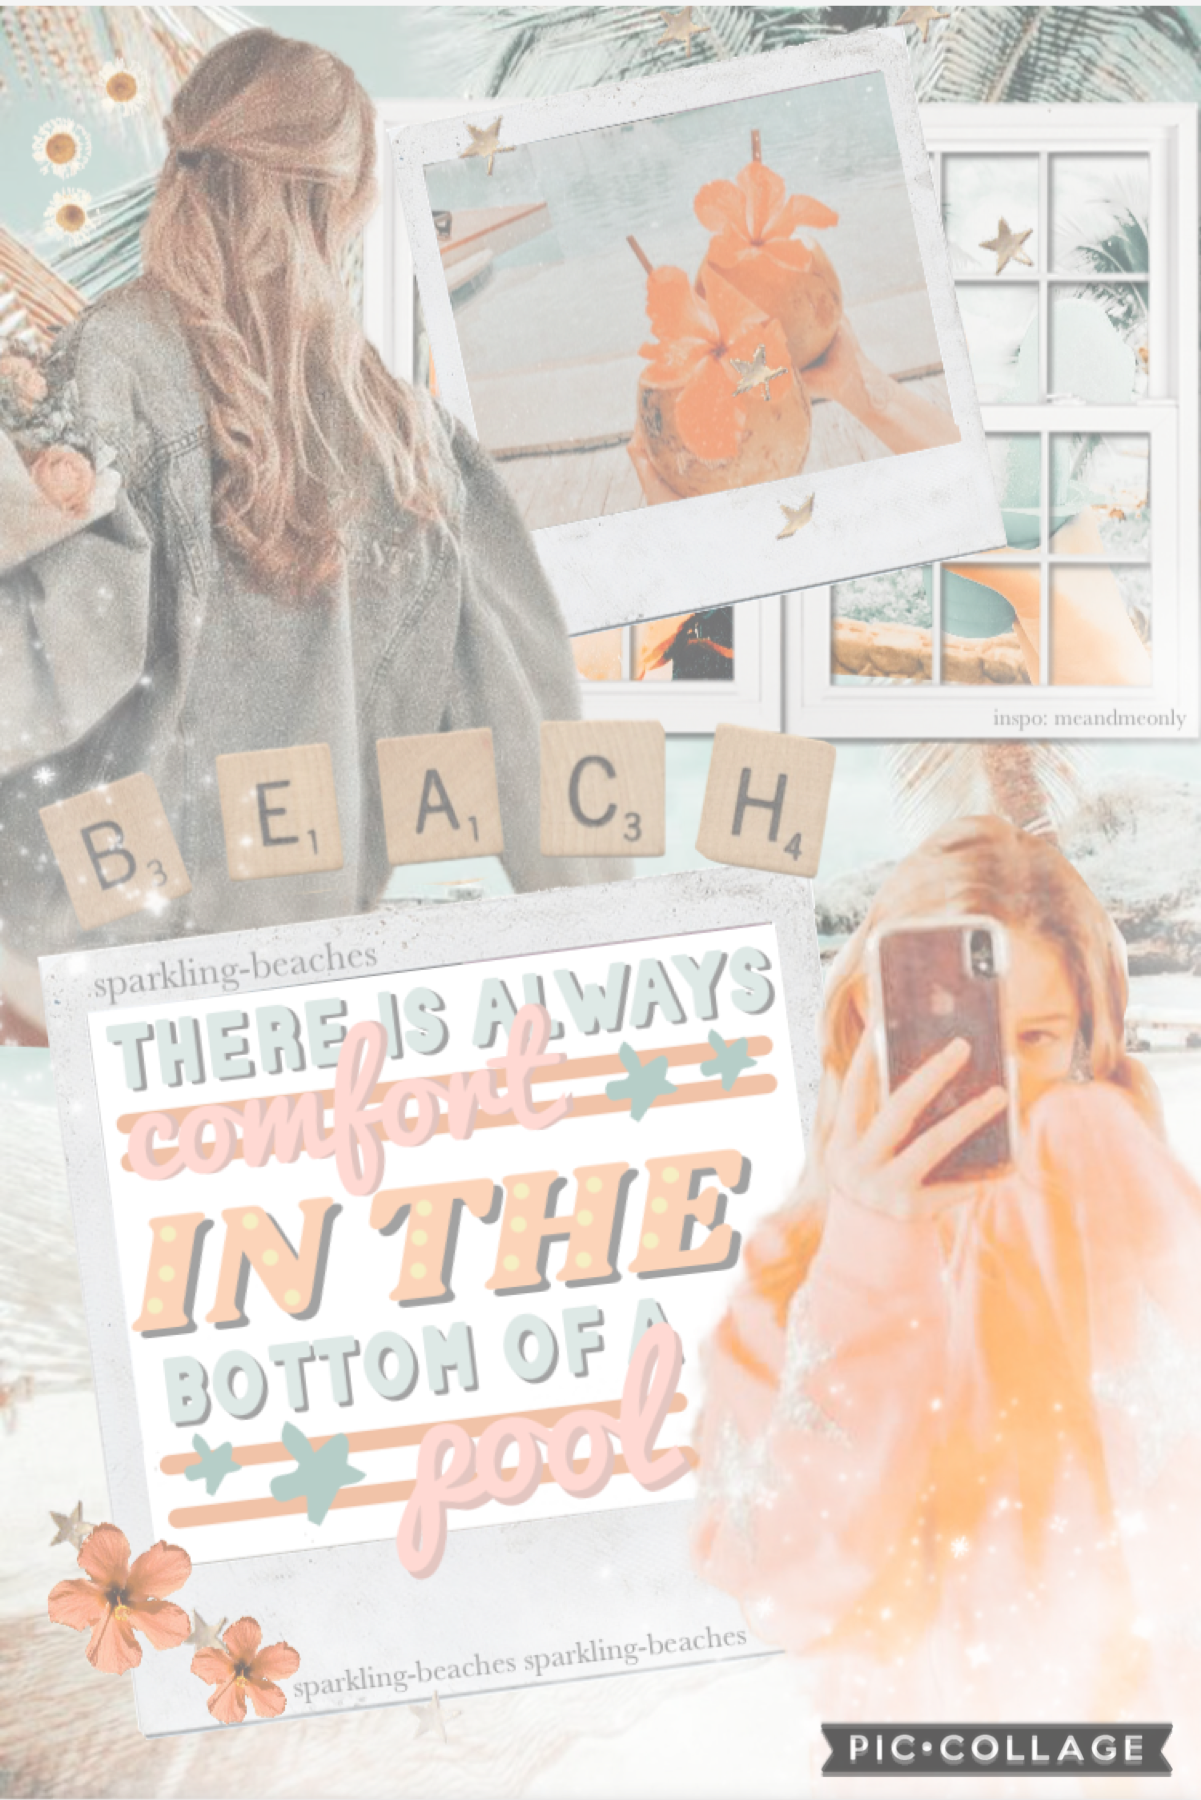 🏖 Tap 🏖 
Hi guys! It’s been a month. I hope everyone is happy and healthy!
Have a nice break to all those who are currently on one! 💗 
Shoutout: simple-bliss, sweet_lavender and _thebluestskies_! Love you ❤️ 